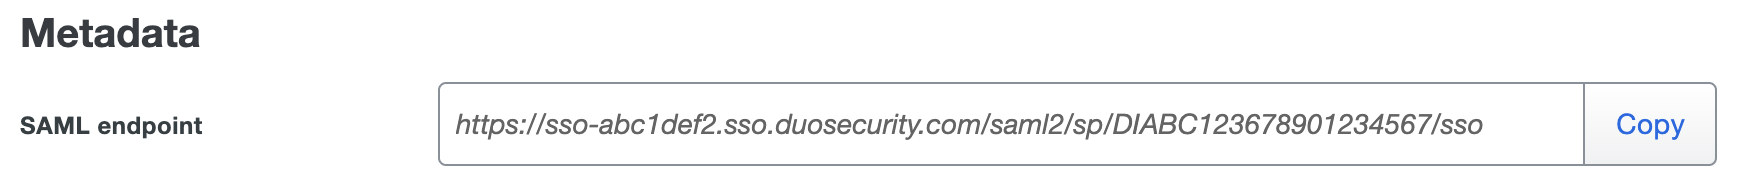 Duo Signal Sciences SAML Endpoint URL